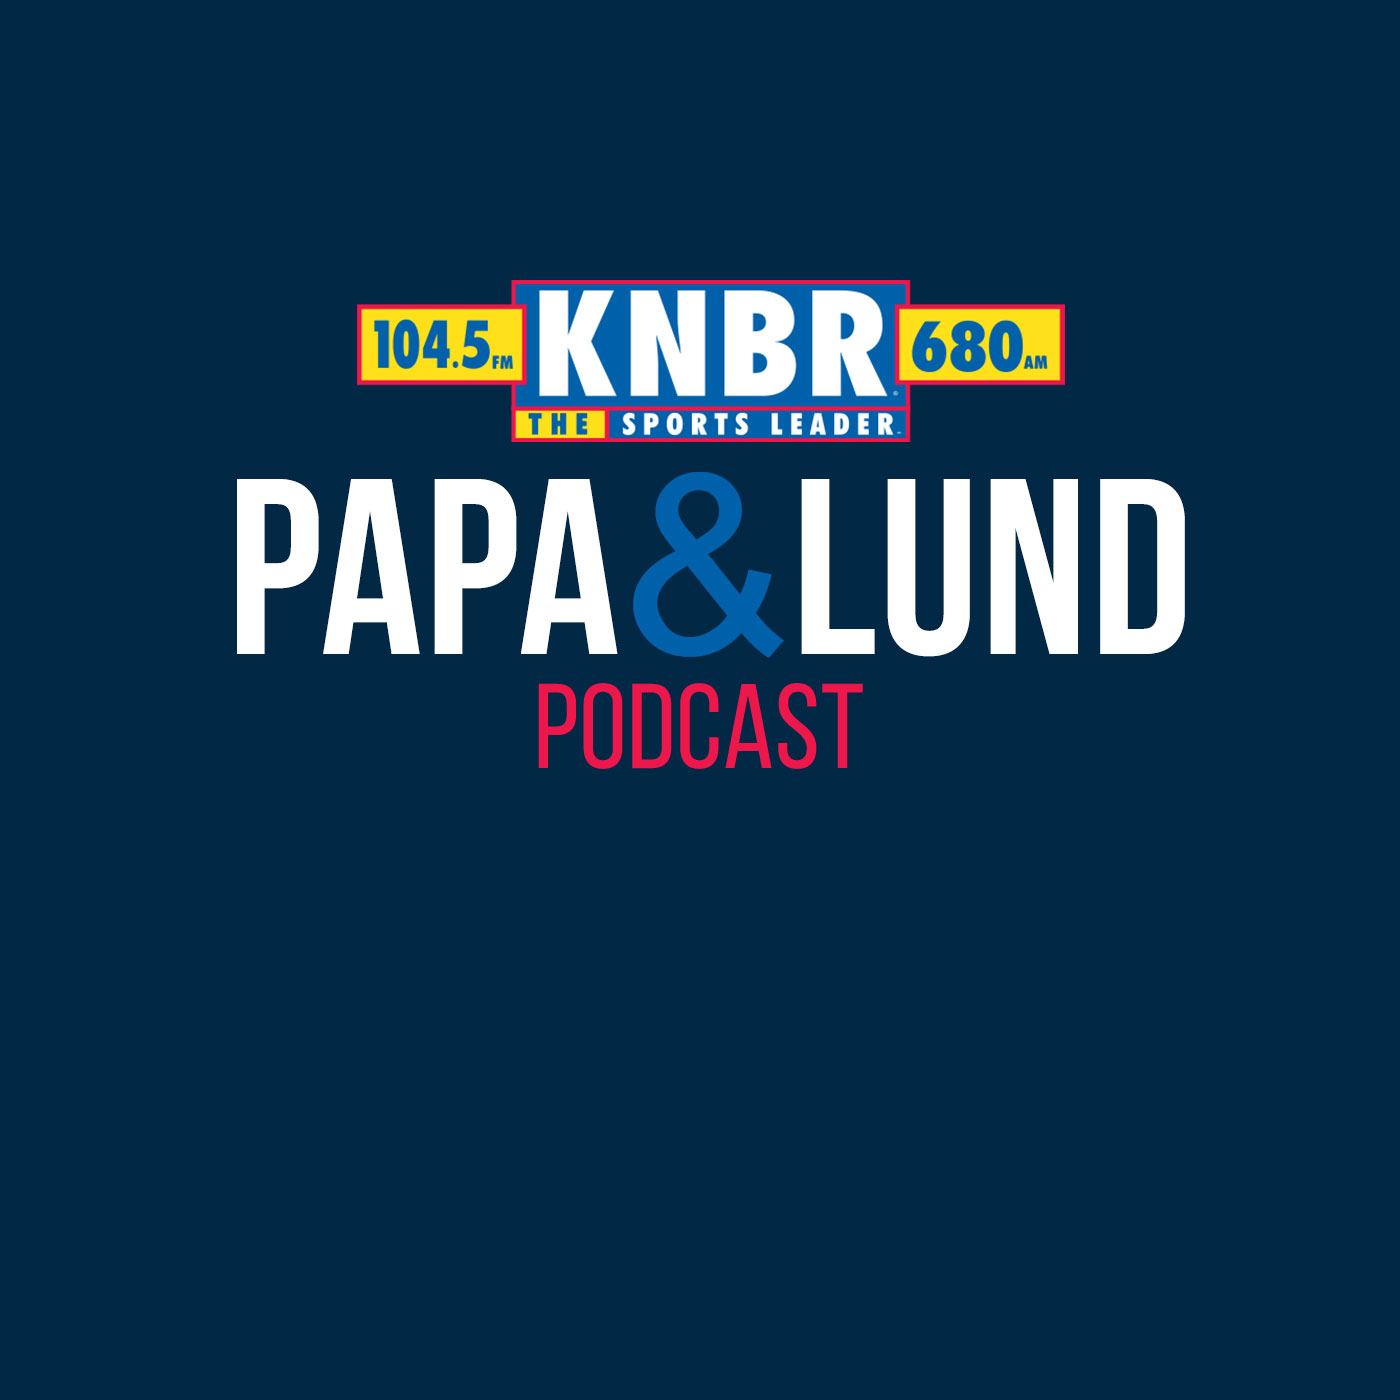 11-14 Mike Martz joins Papa & Lund to discuss the traits that separates him from